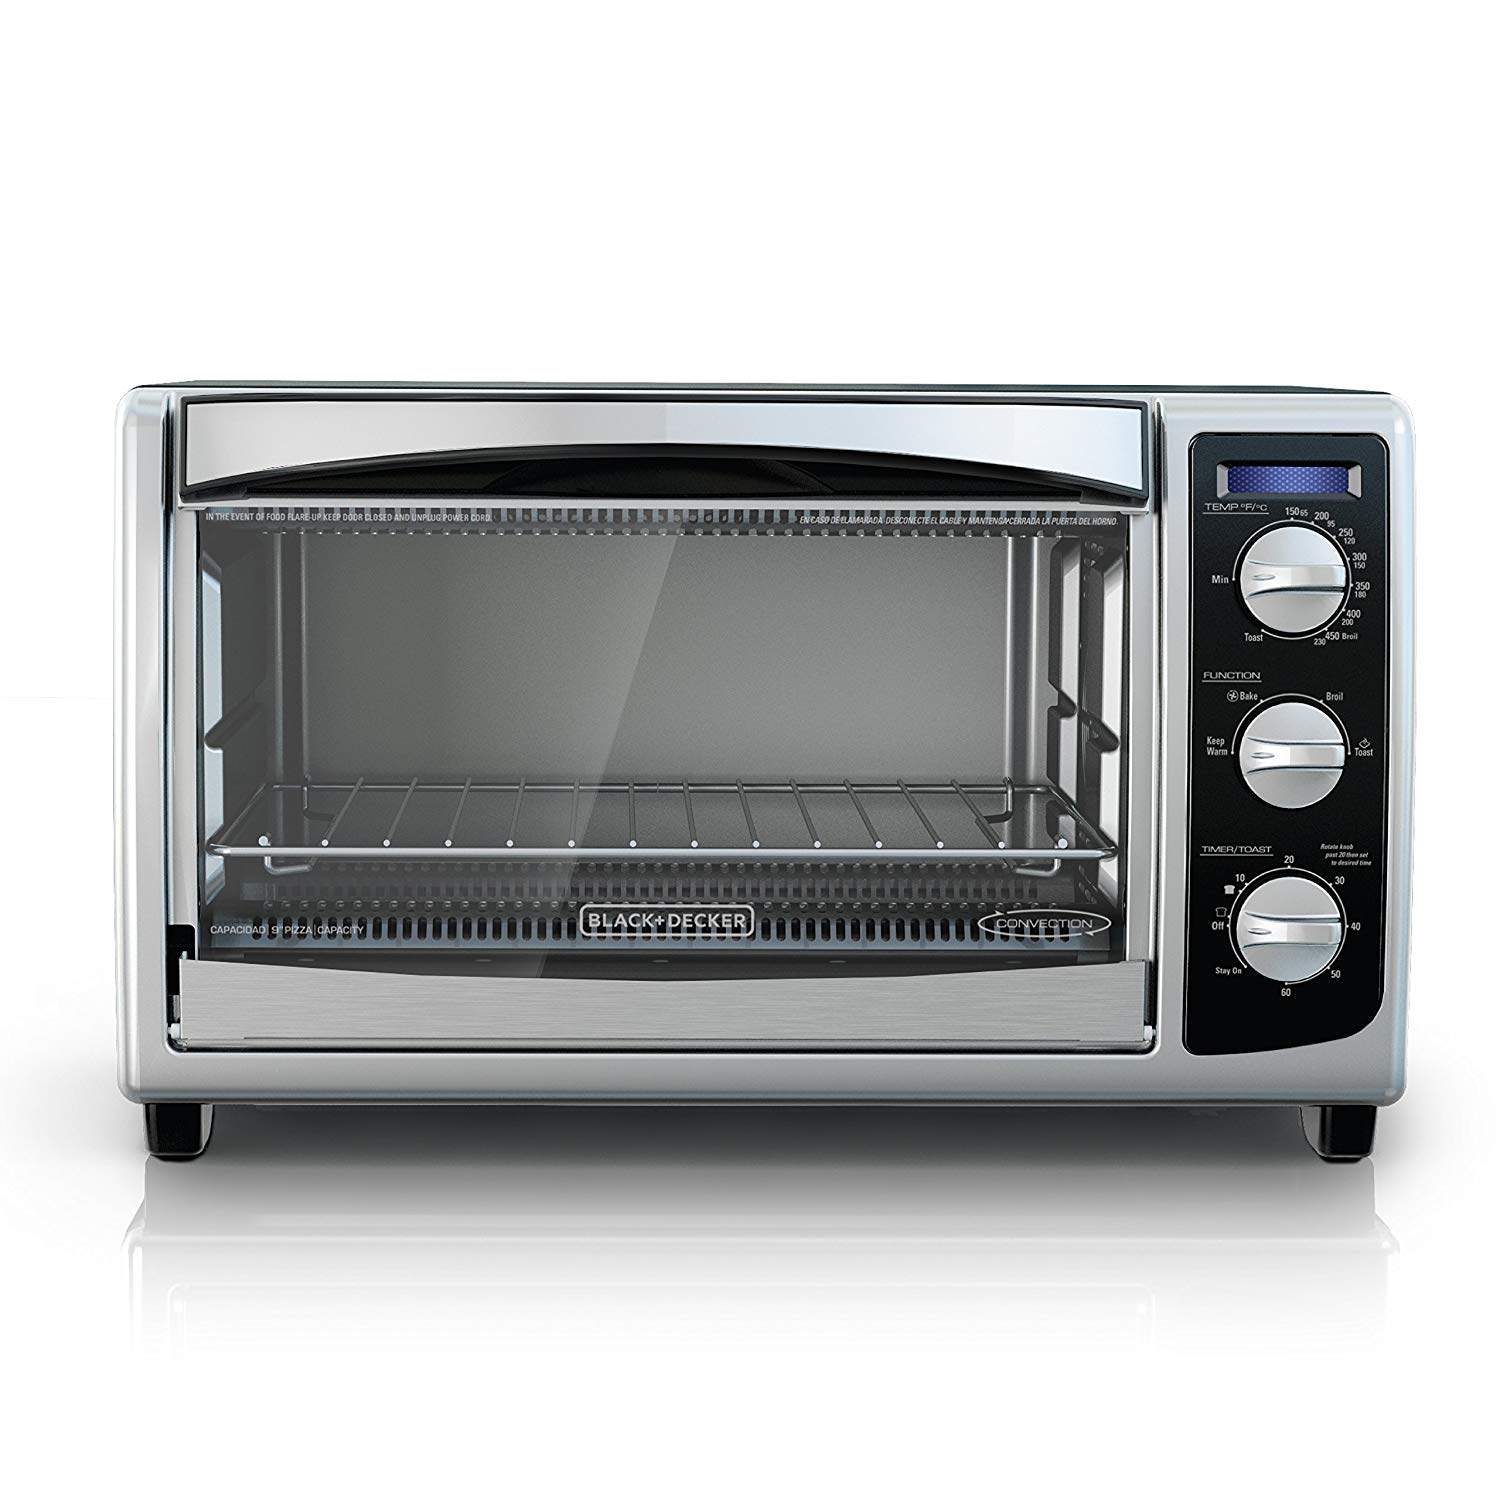 An image of Black and Decker TO1675B Black Convection Countertop Compact Six Slice Toaster Oven | Toasty Ovens 